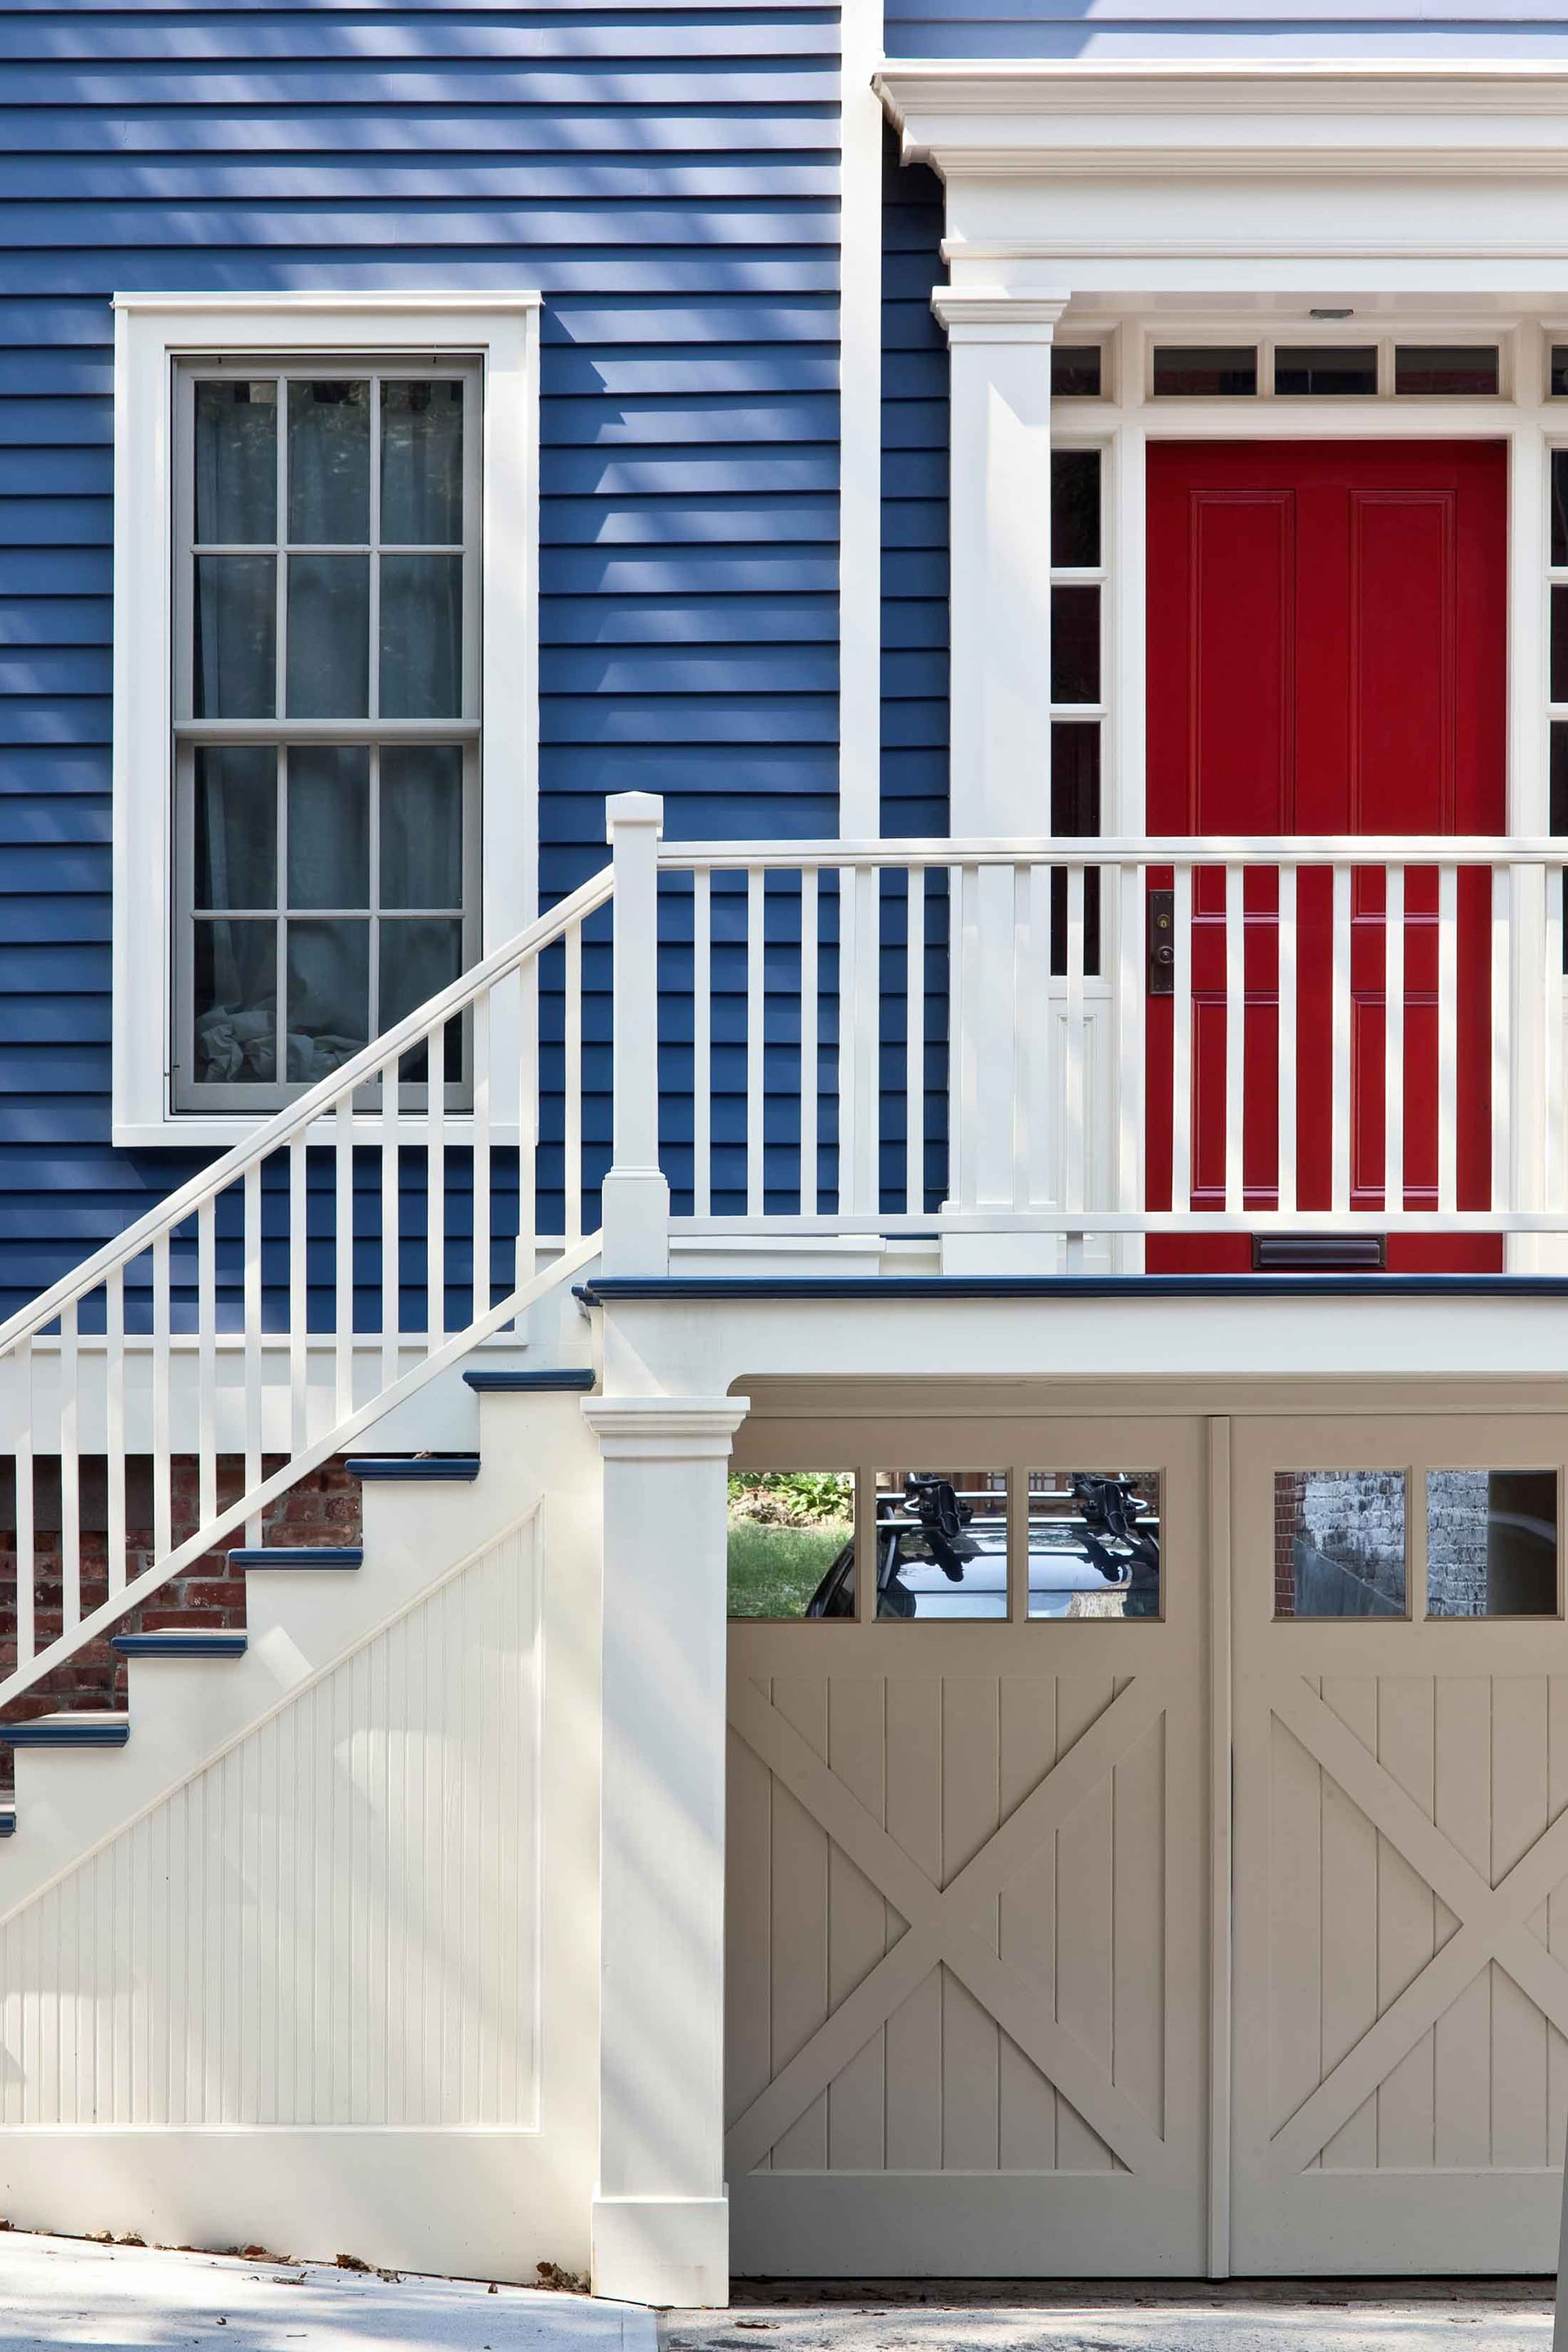 Restored front façade of a large rowhome with garden-level garage, blue siding, white trim, and a red front door.